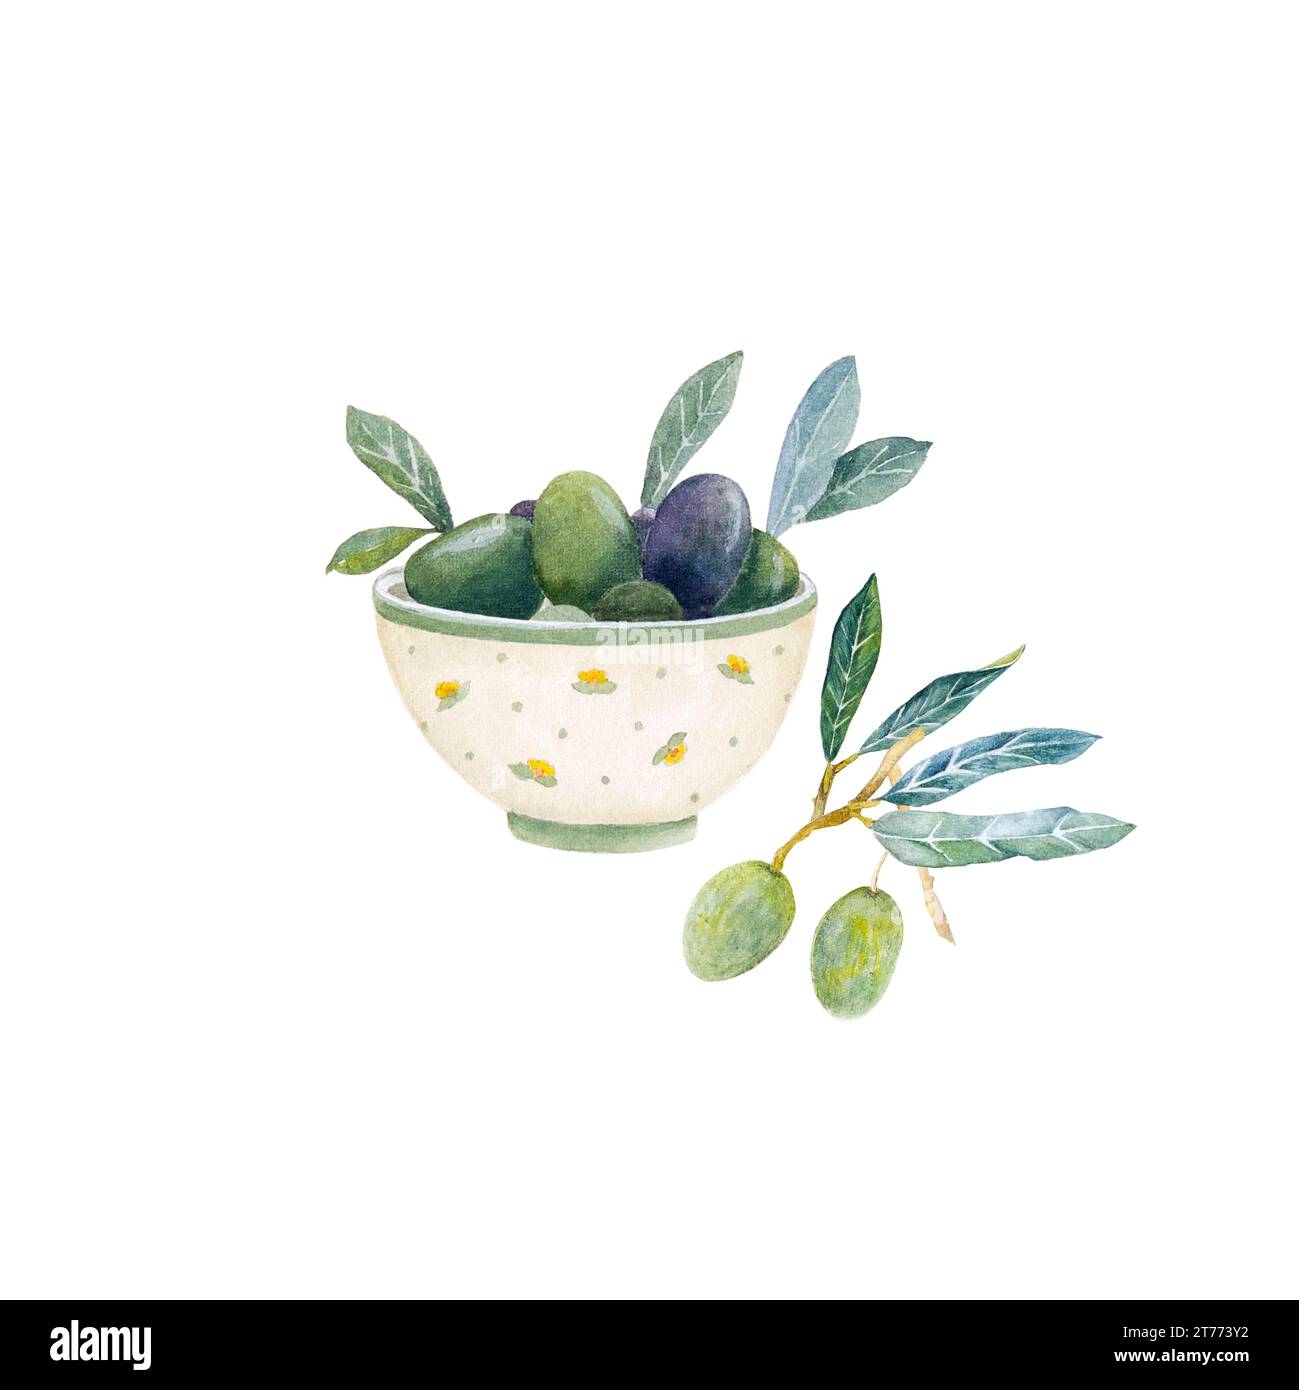 Watercolor bowl with jucy olives. appetizer with ripe olives. Hand draw watercolor illustration of olives and olive branch. Stock Photo